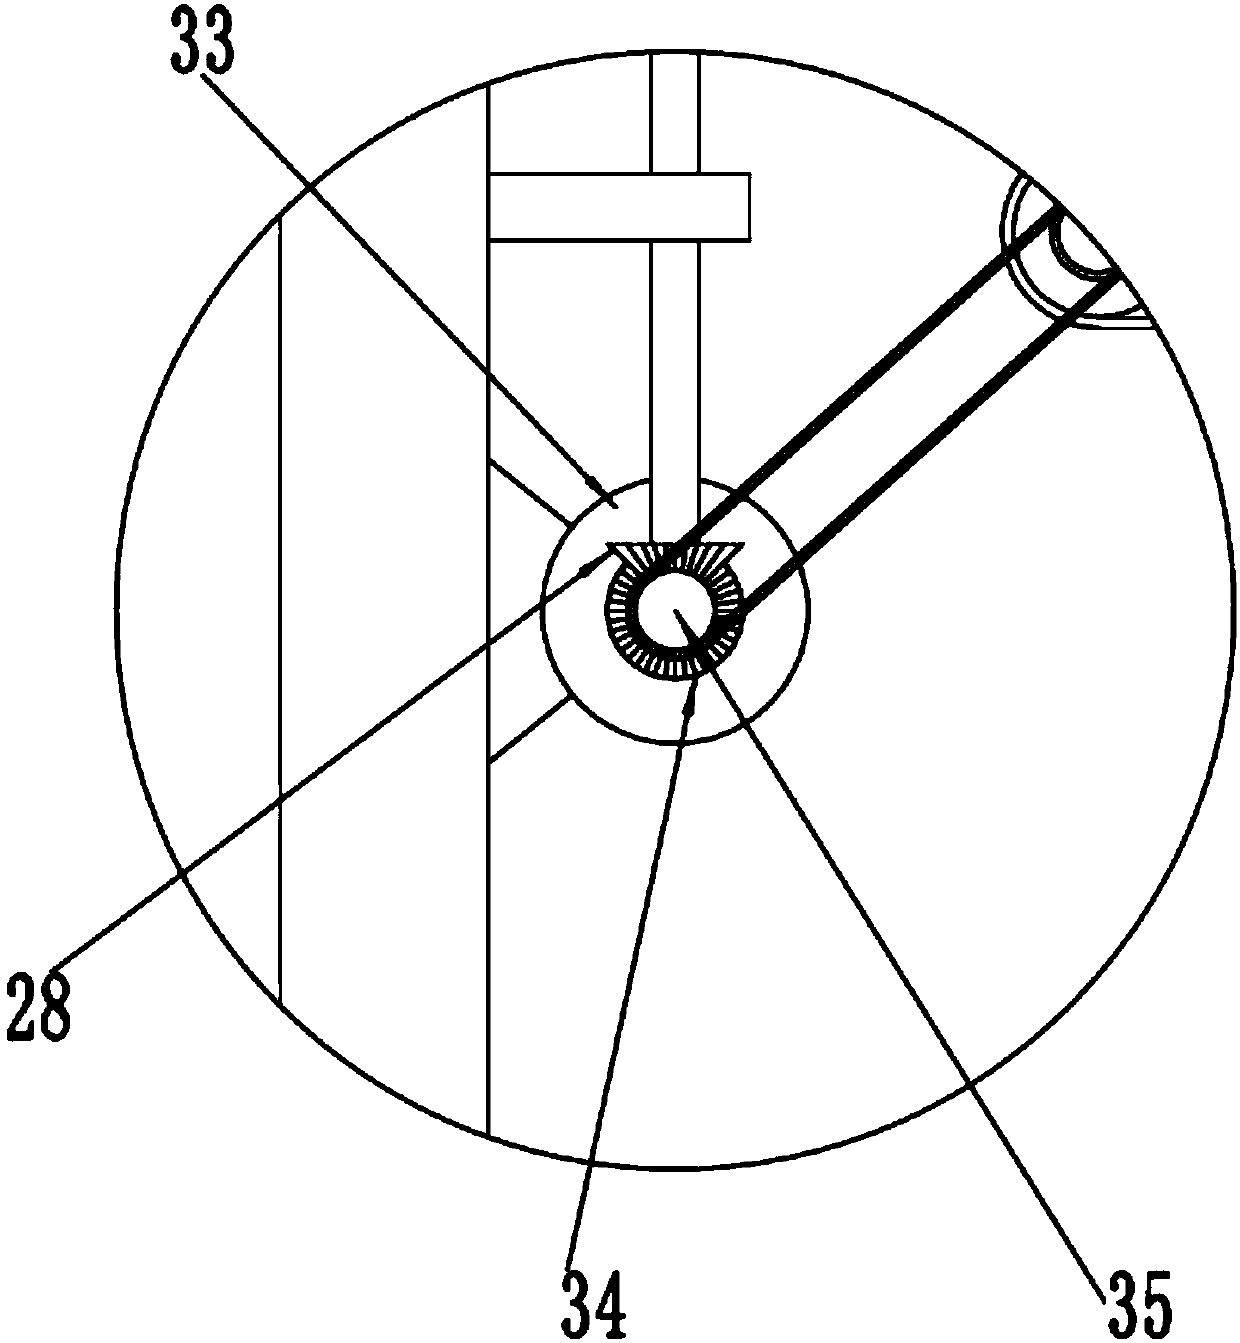 Peanut classifying and shelling device